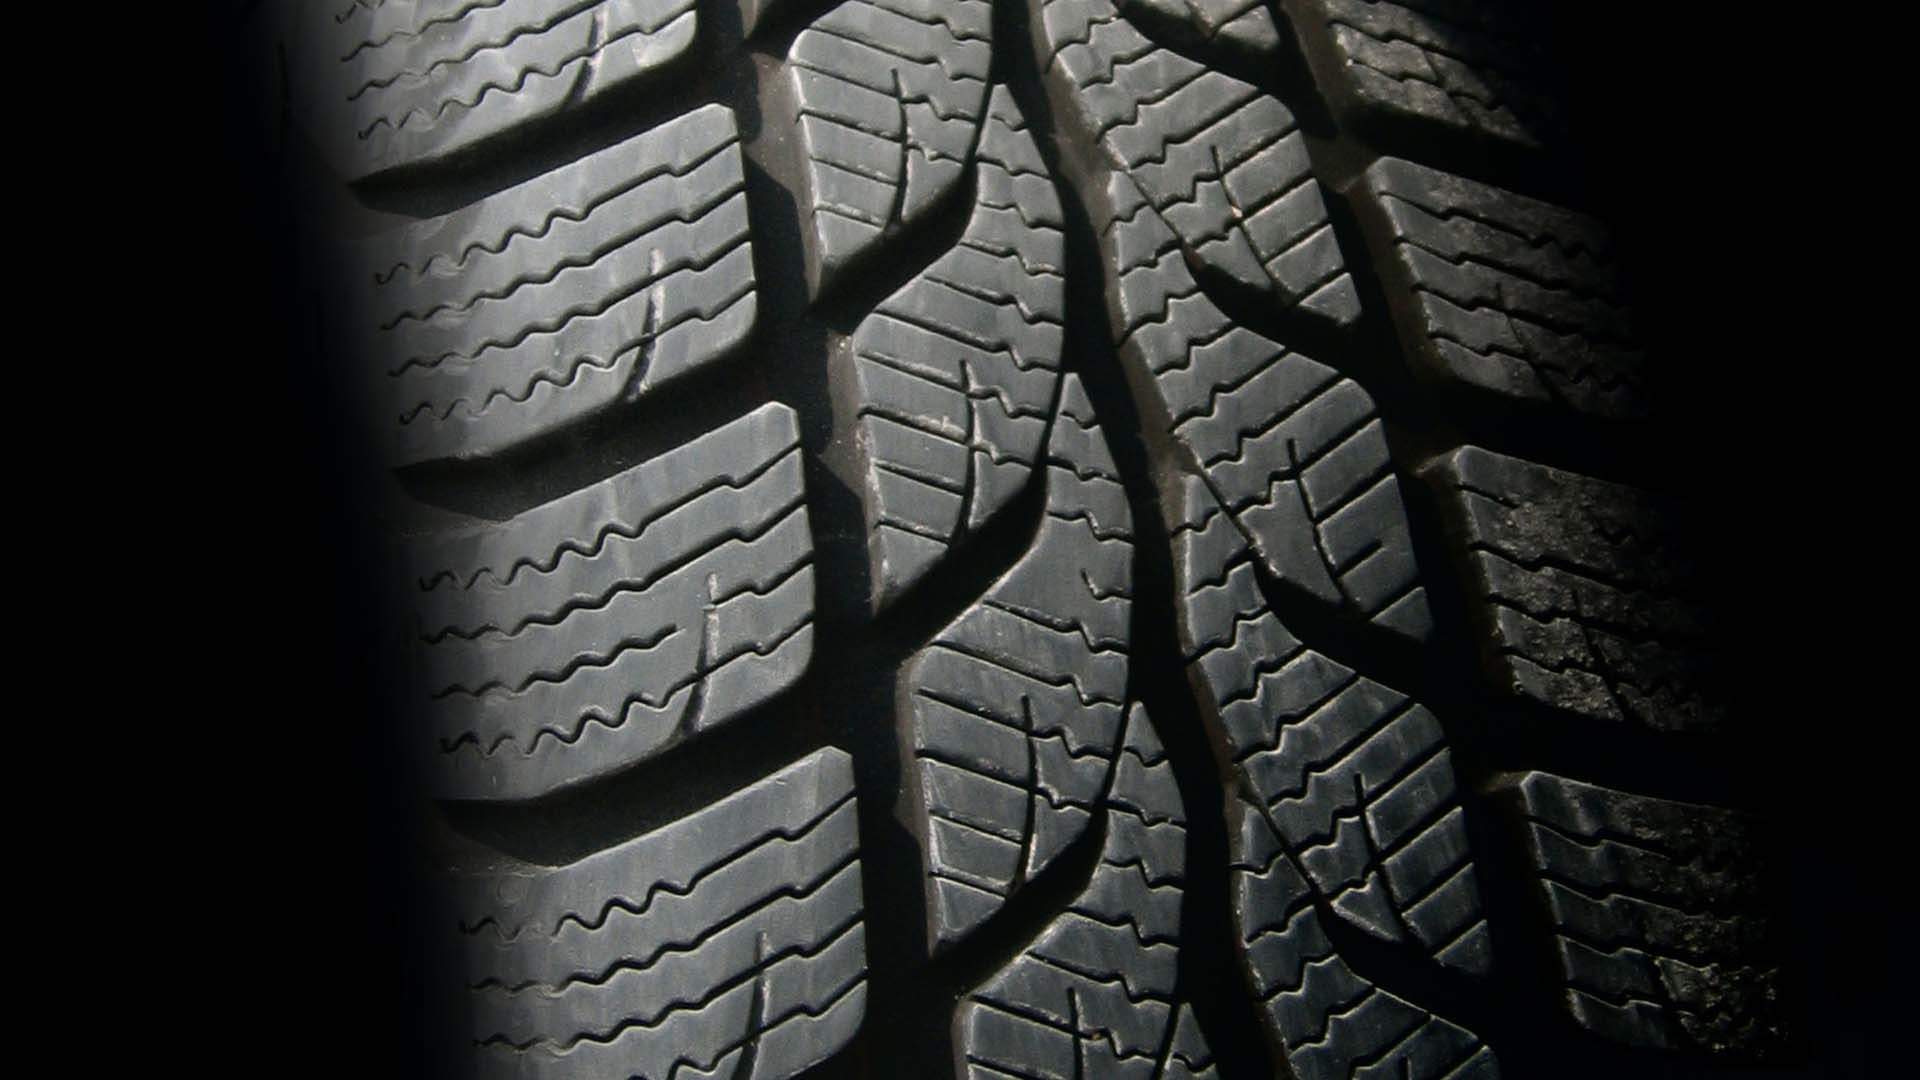 Closeup of tire showing tread